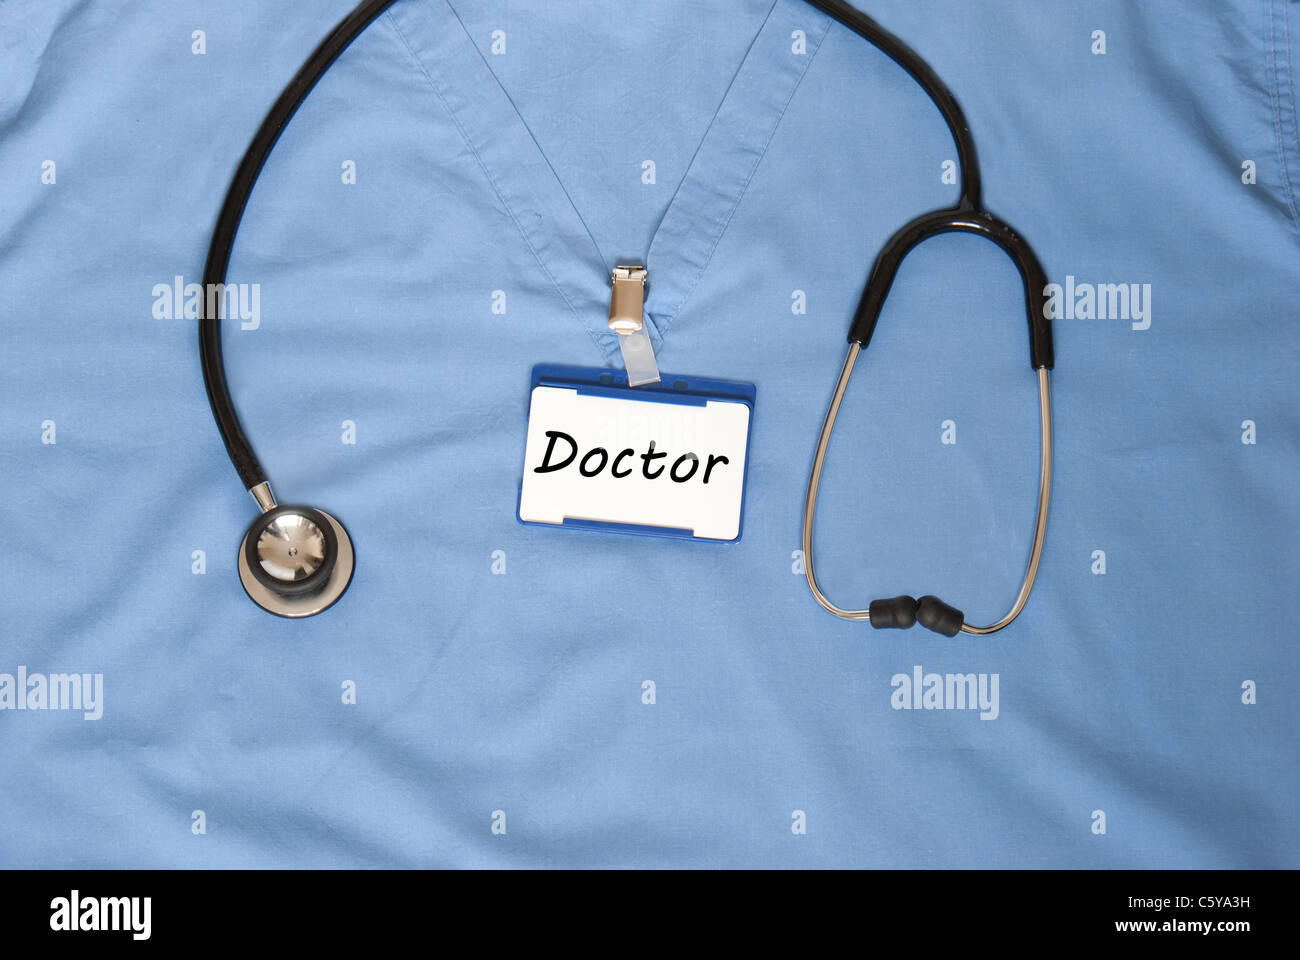 Doctor depicted with scrubs and a stethoscope Stock Photo